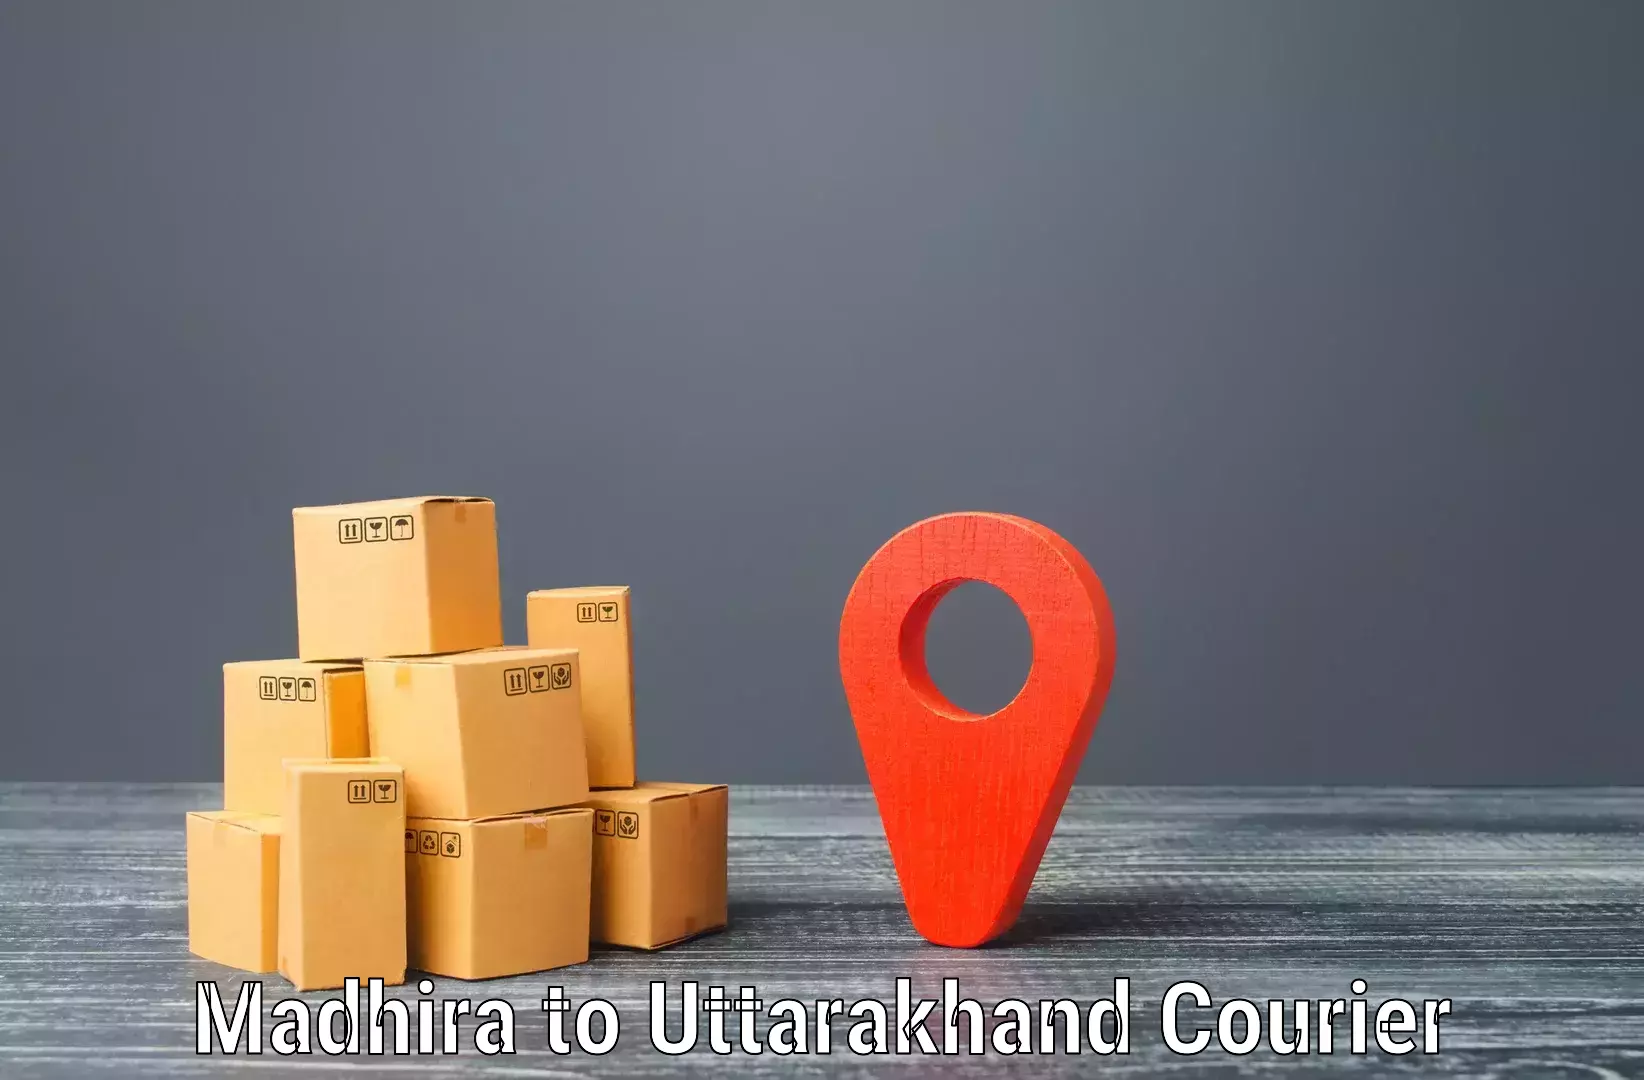 Efficient order fulfillment Madhira to Roorkee